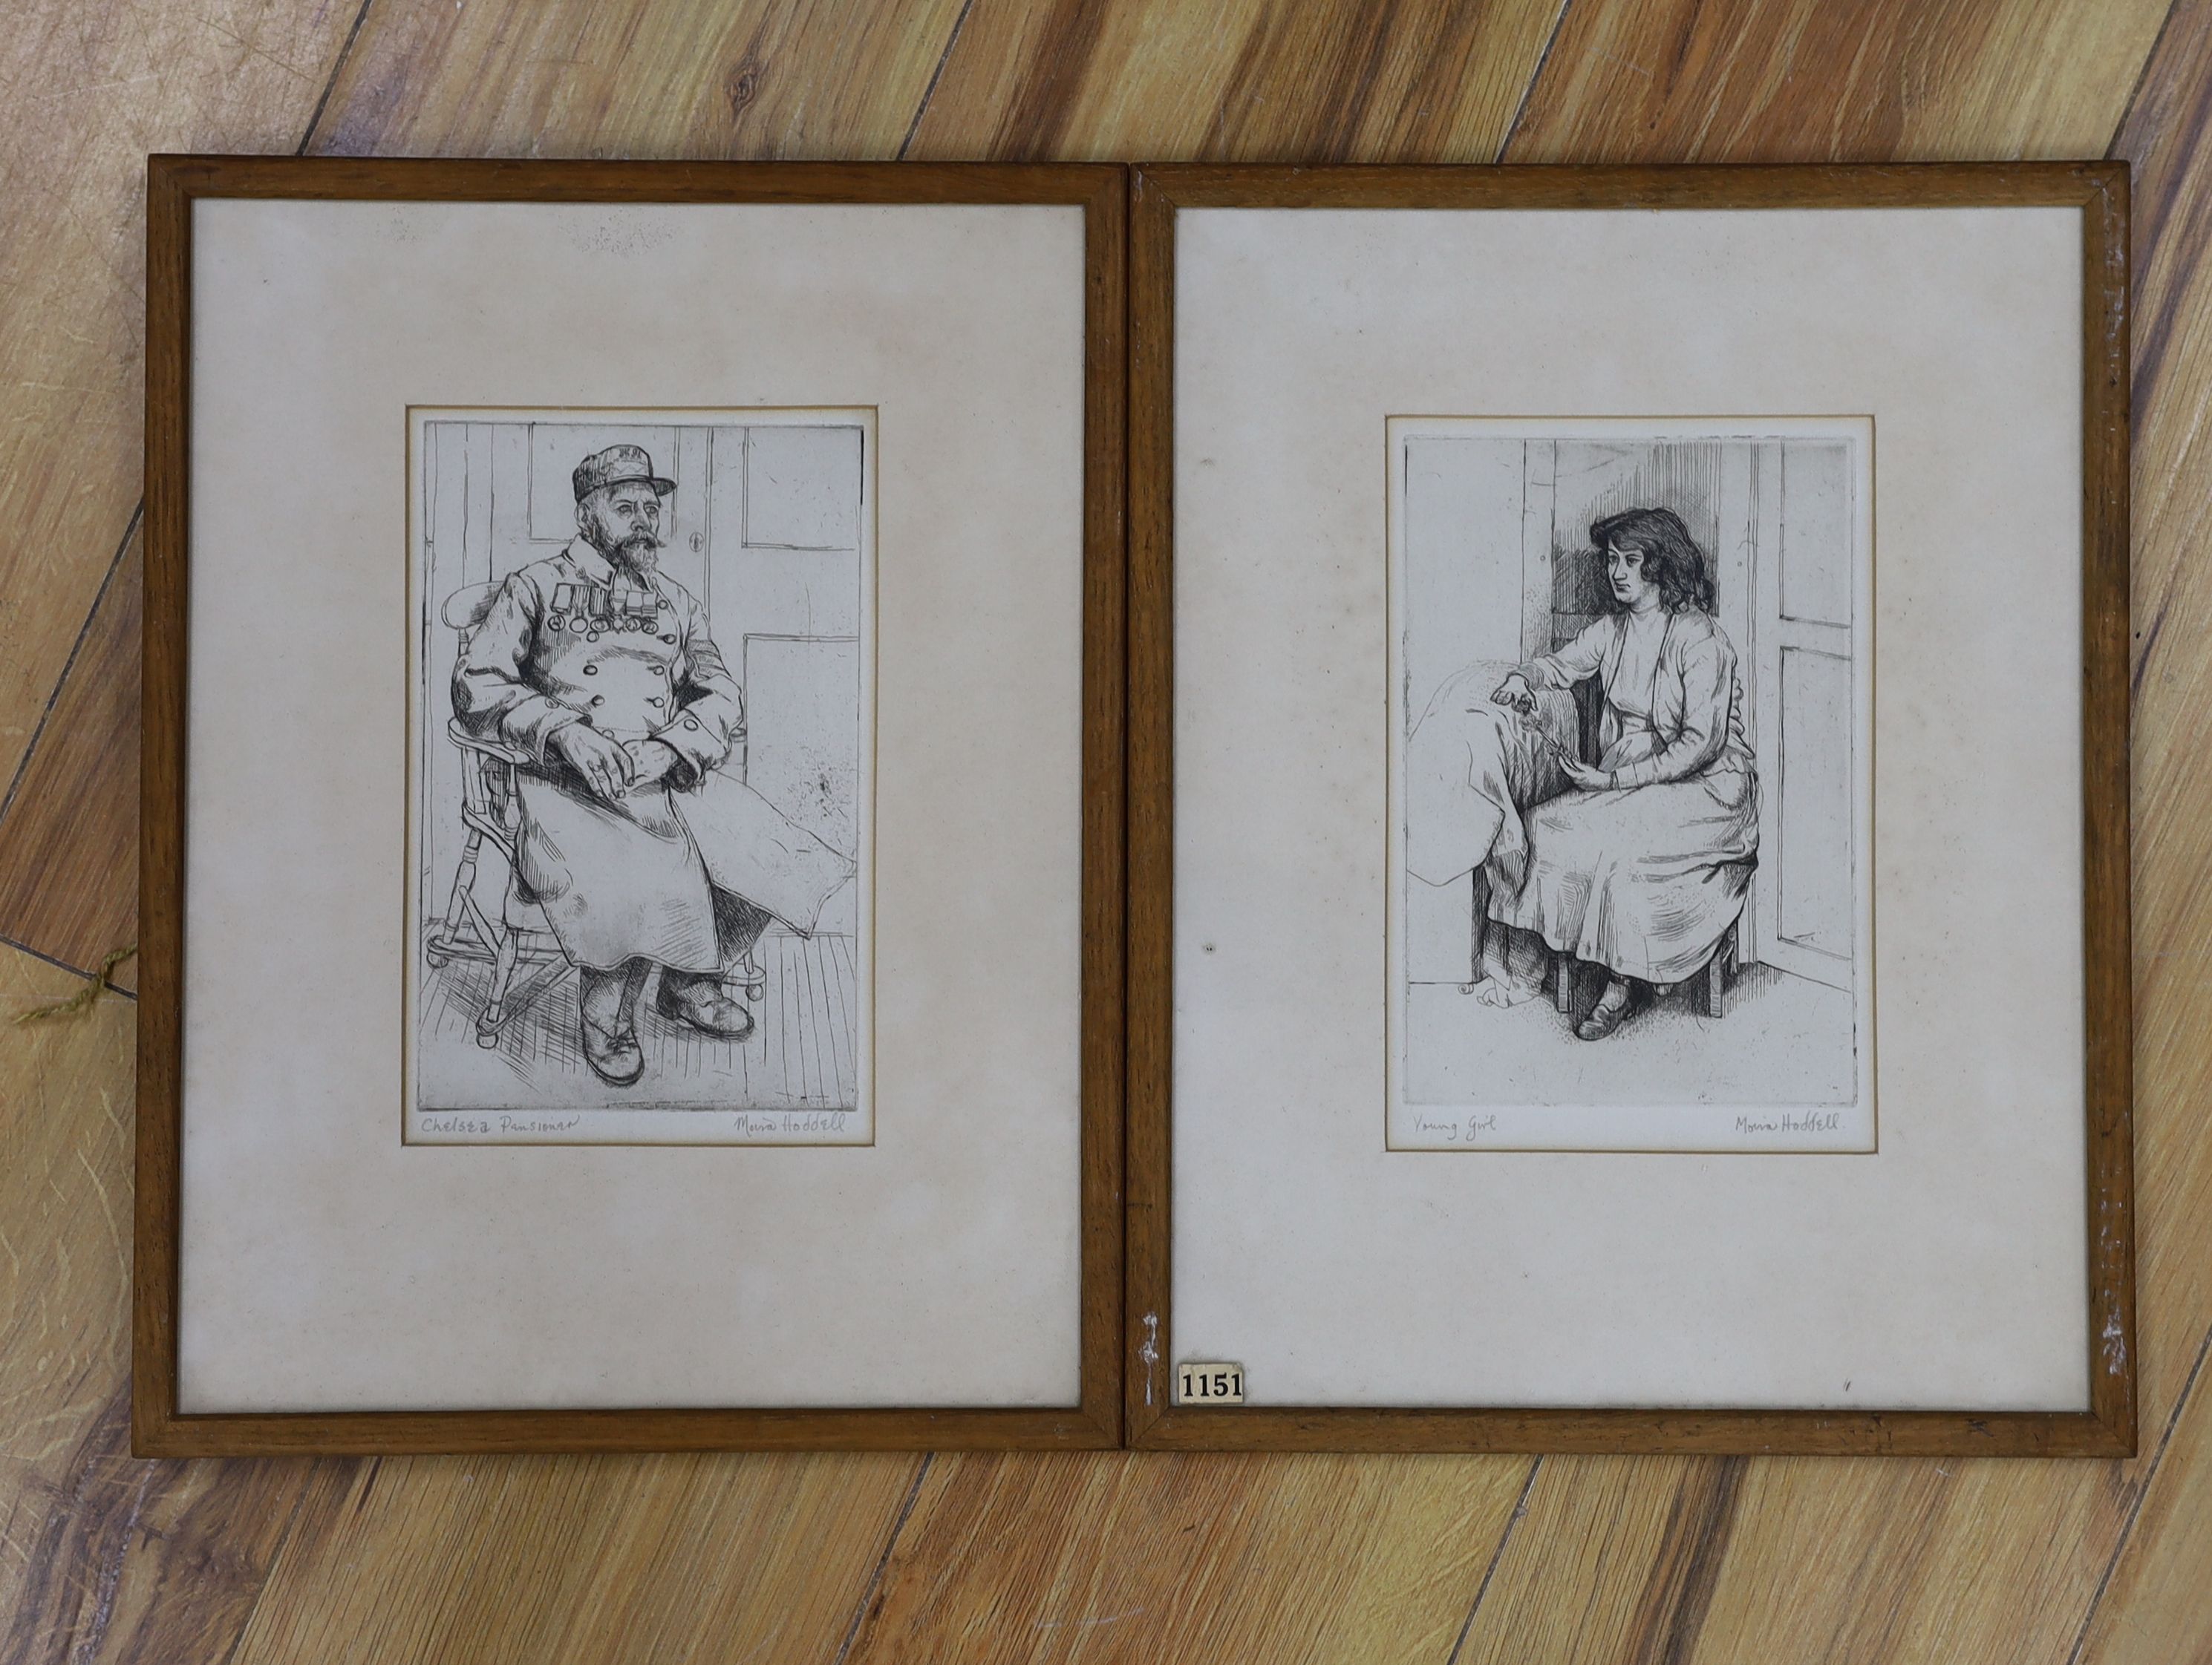 Moira Hoddell (1927-), two etchings, 'Young Girl' and 'Chelsea Pensioner', signed in pencil, 19 x